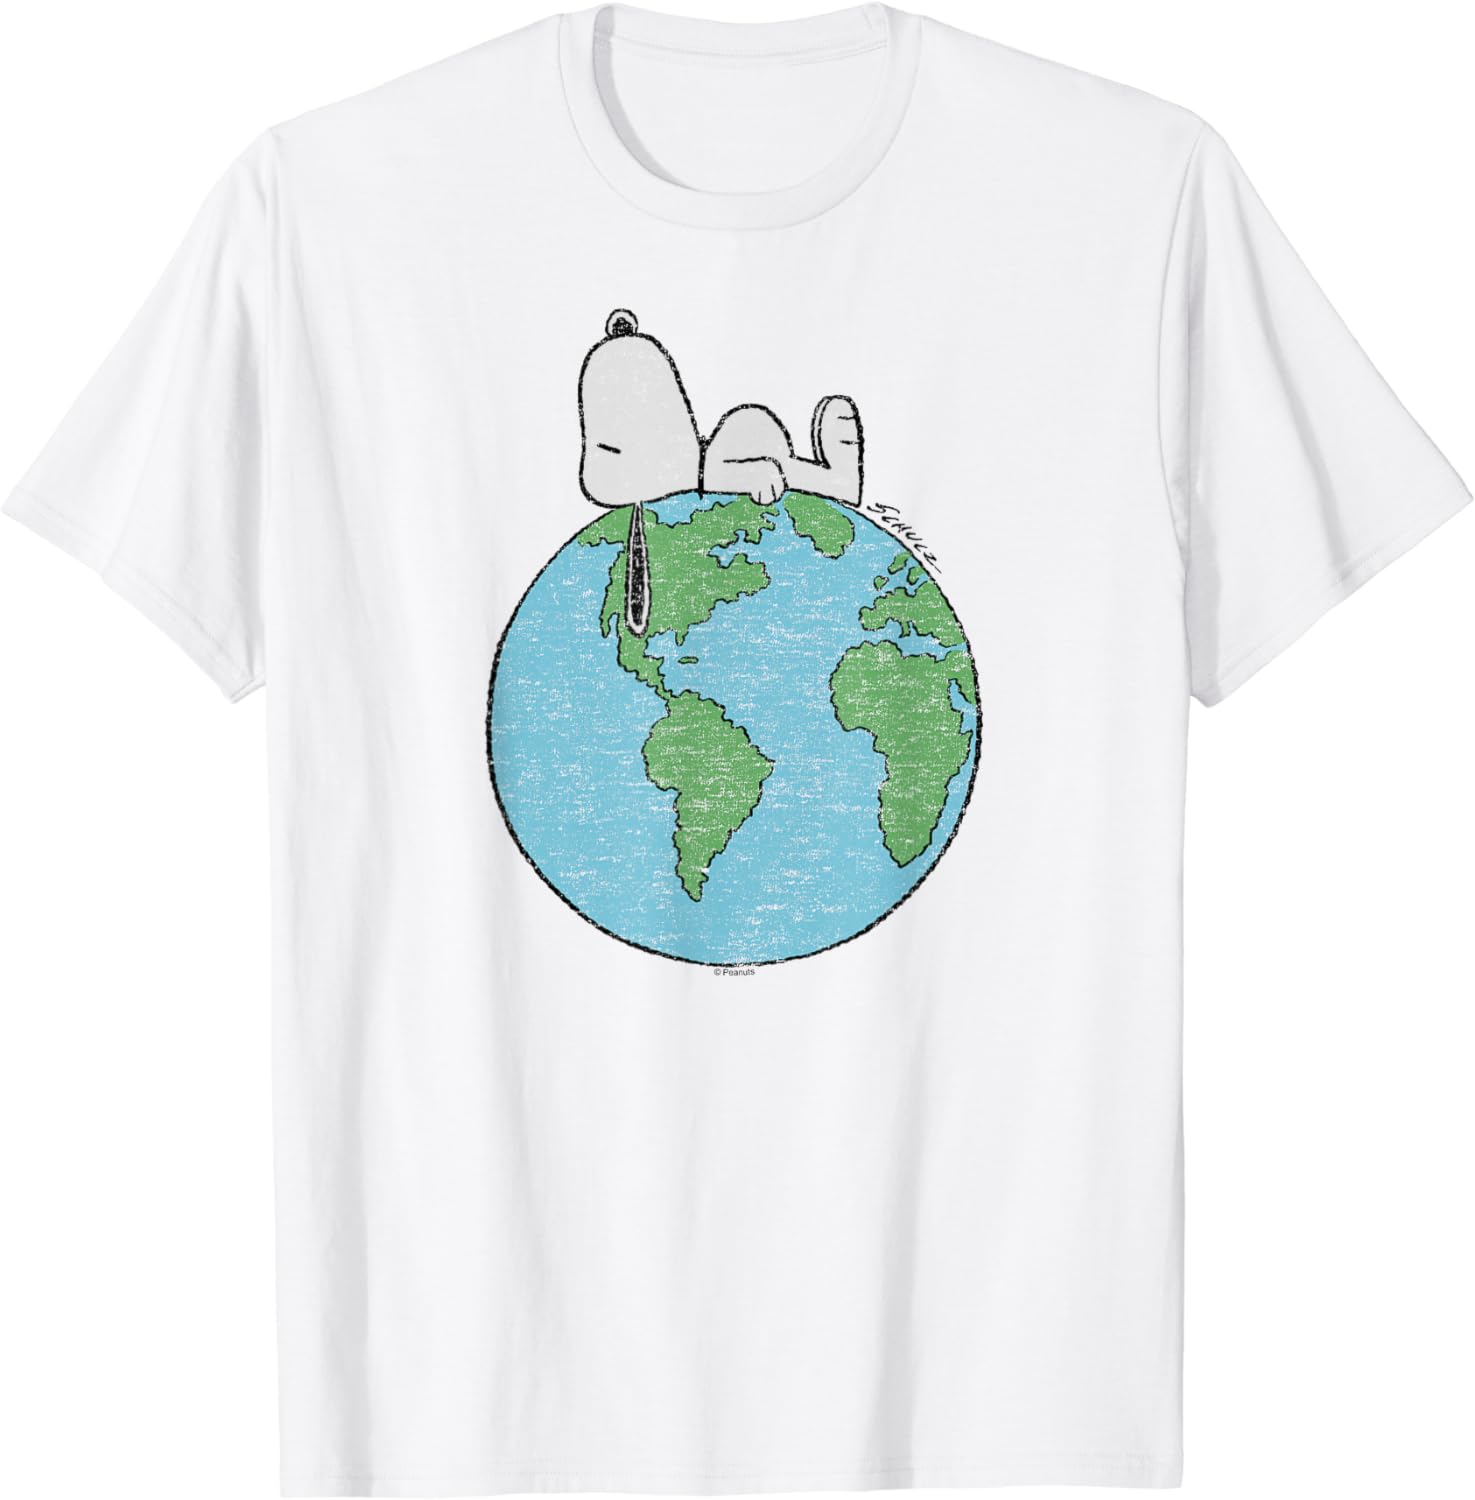 Snoopy Earth Day T-Shirt: A Comfortable Favorite